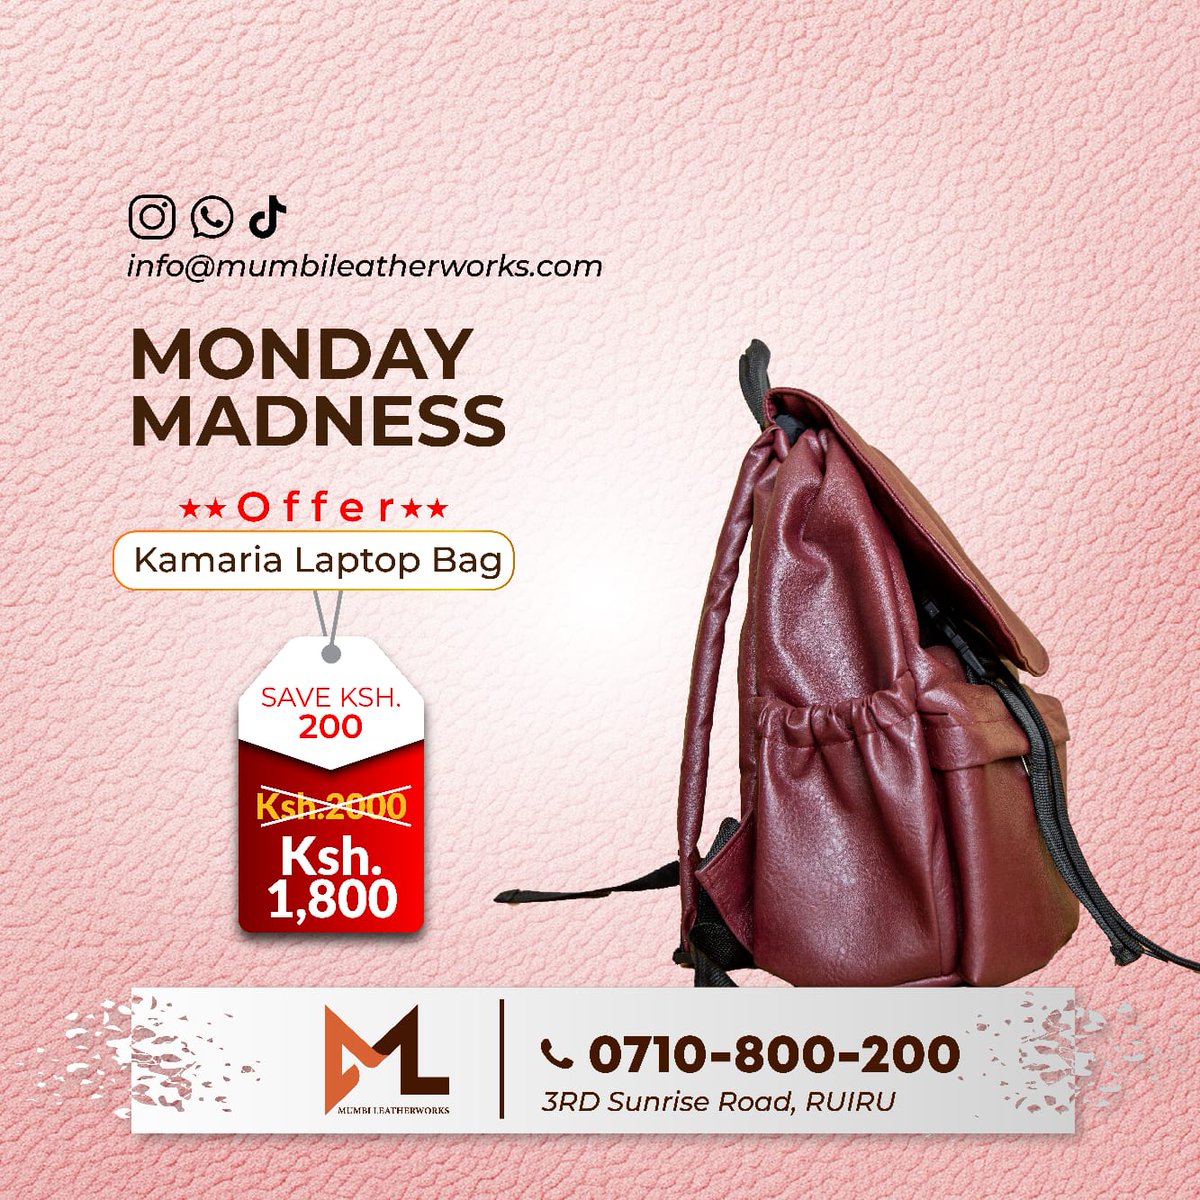 Make a statement this Monday with our impeccably designed leather bags. Elevate your look and conquer the week with confidence. #mondaystyle #mondaymood #mondaymotivation #monday #mondayvibes #mondayblues #bag #leather #leatherbag #leathercraft #backpack #laptopbag